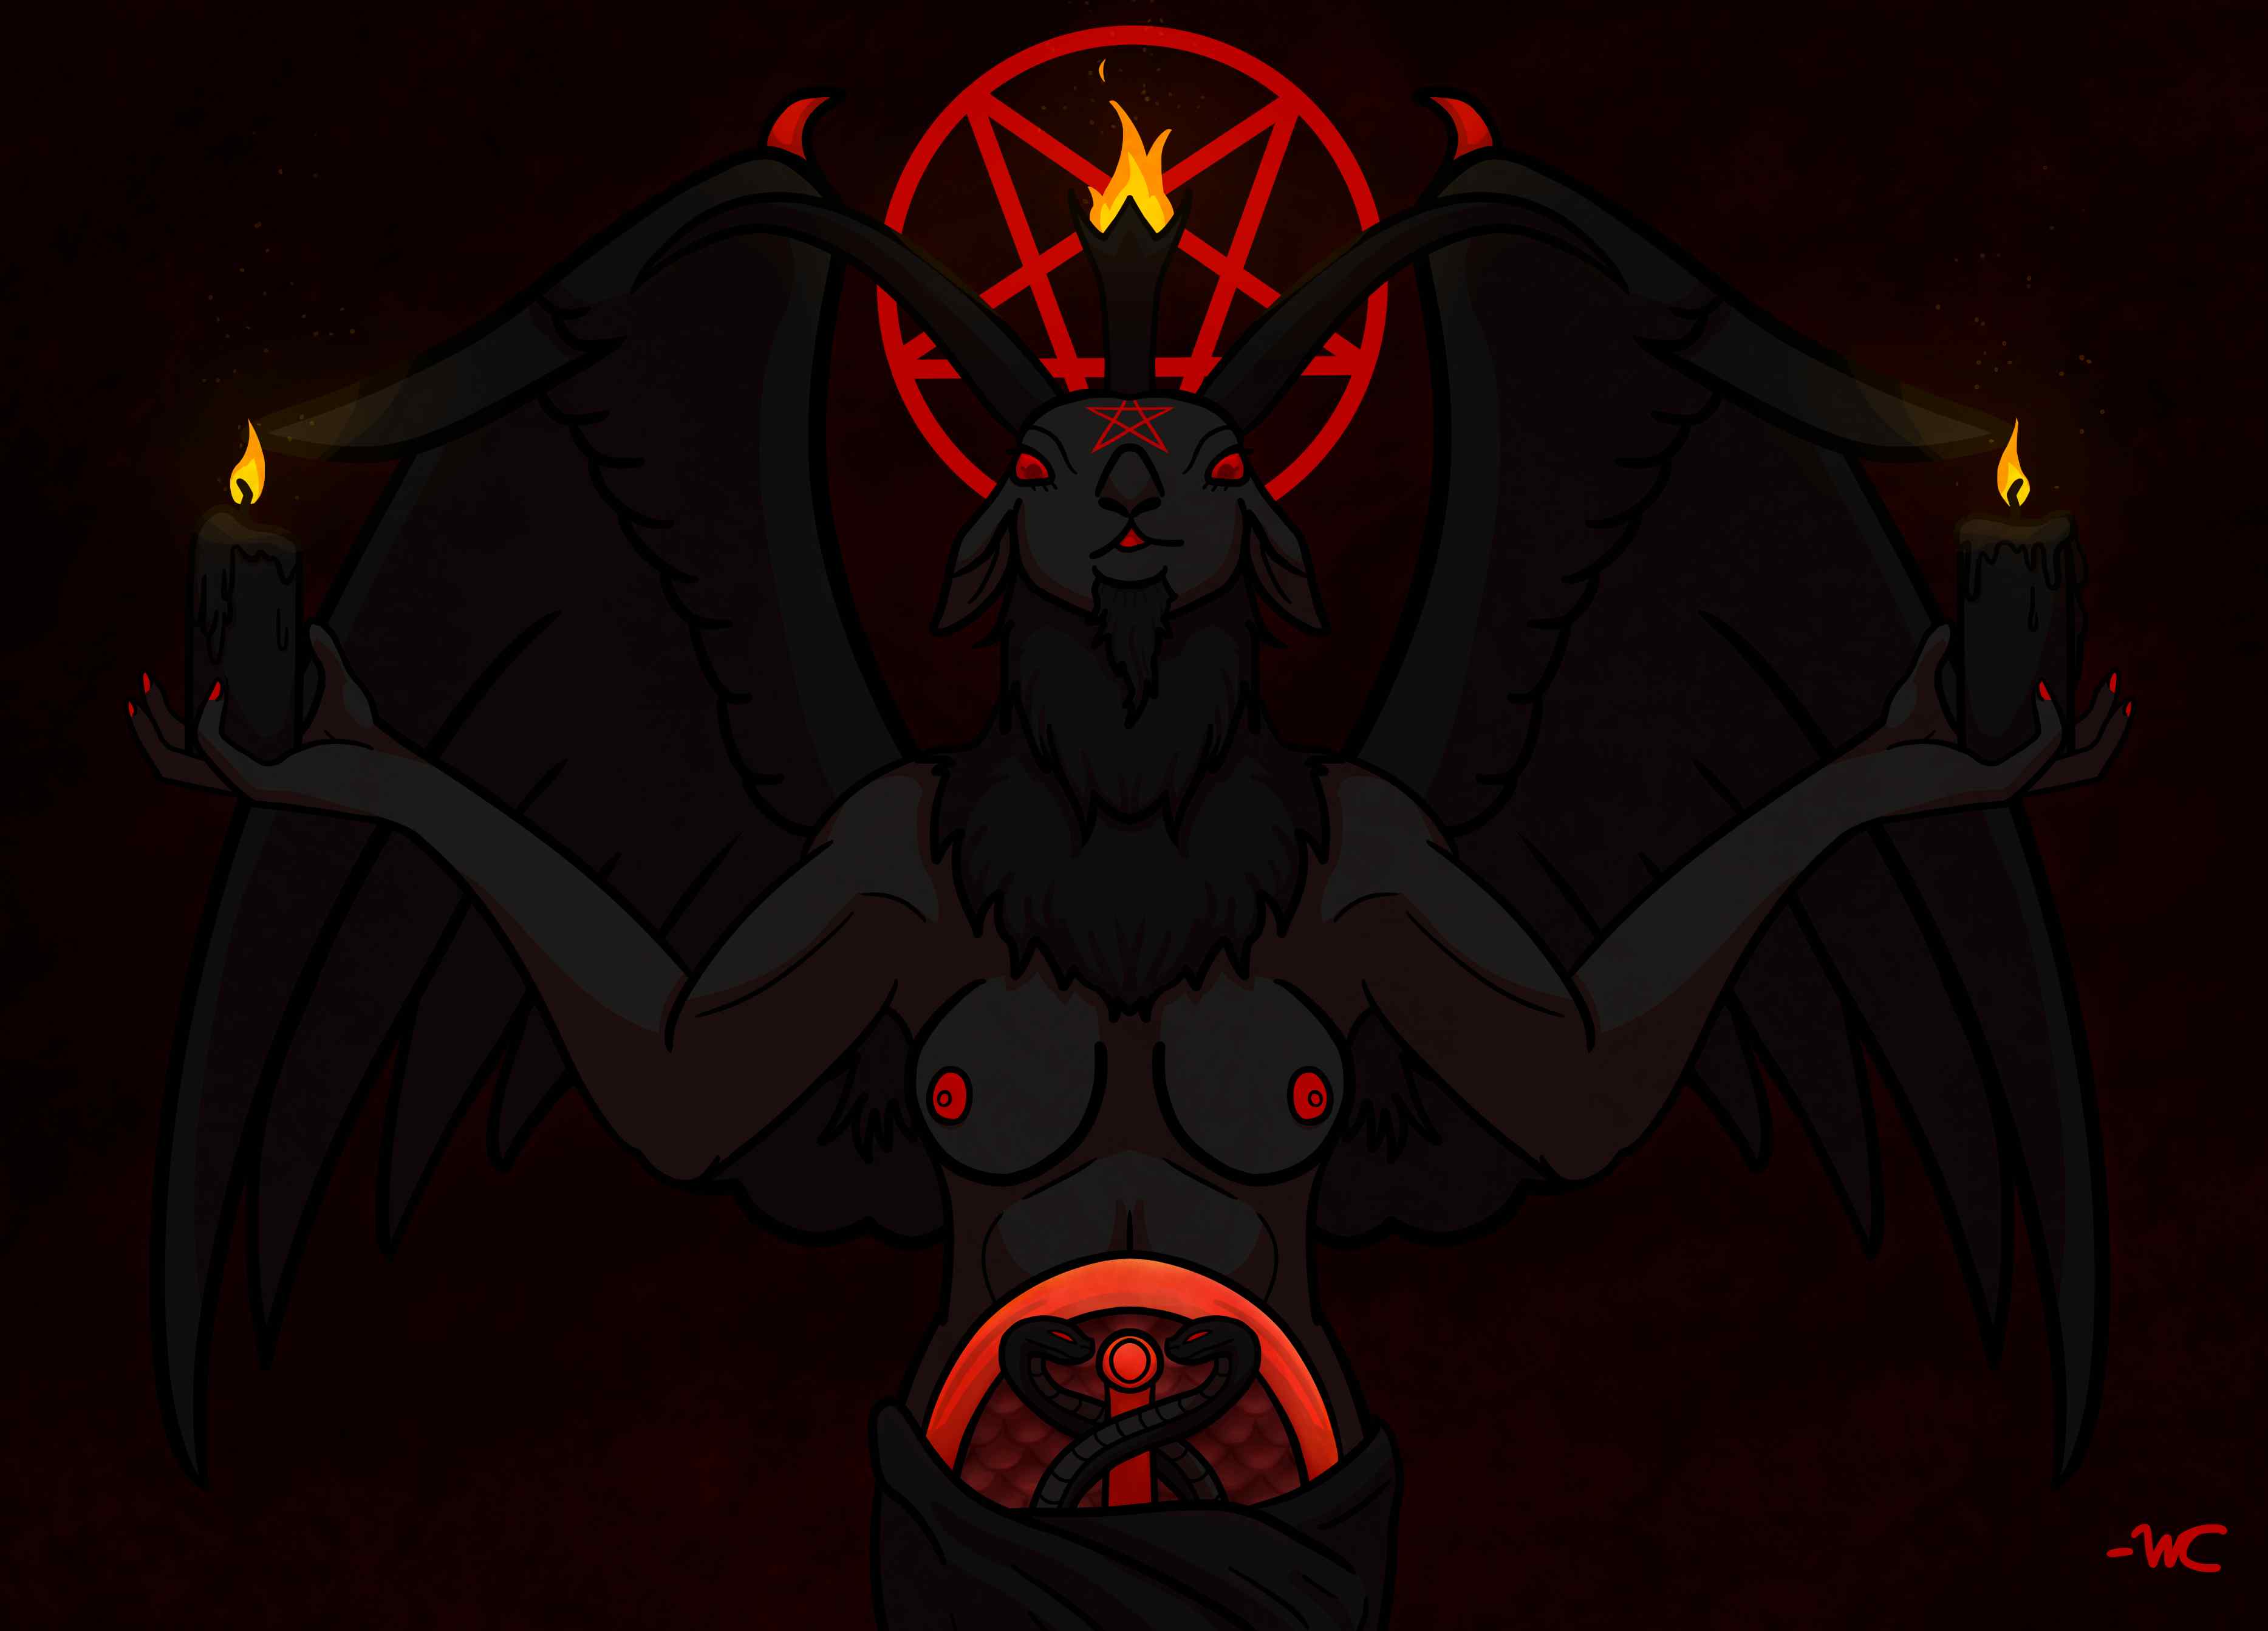 Baphomet, the Sabbatic goat. Upper body, front facing. They are primarily black with red eyes, nails, and nipples. They have their breasts exposed. They are holding a lit black candle in each hand. The torch on Baphomet's head is also lit. The lower part of Baphomet has a gold ring and rod, embraced by two black snakes. Within the ring there are red scales. Baphomet is also wearing a cloth on their lower region. The background is a dark red.